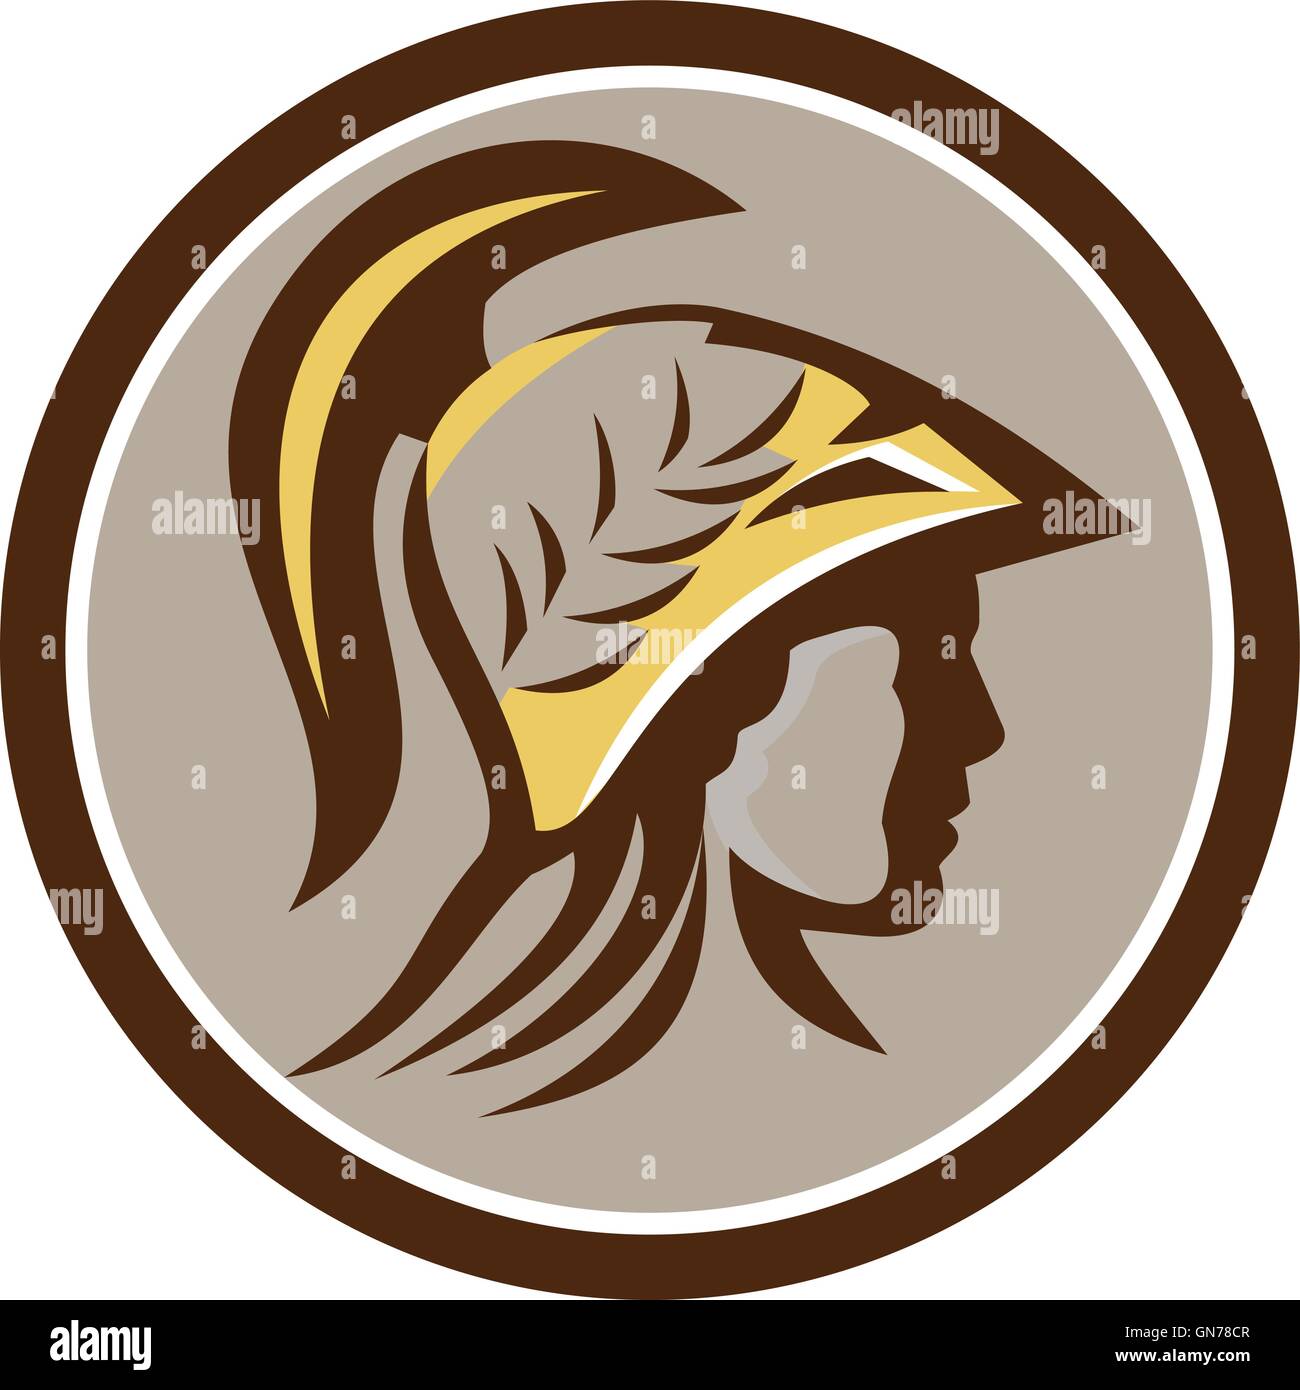 Illustration of Minerva or Menrva, the Roman goddess of wisdom and sponsor of arts, trade, and strategy head wearing helmet with laurel crown viewed from side set inside circle done in retro style. Stock Vector